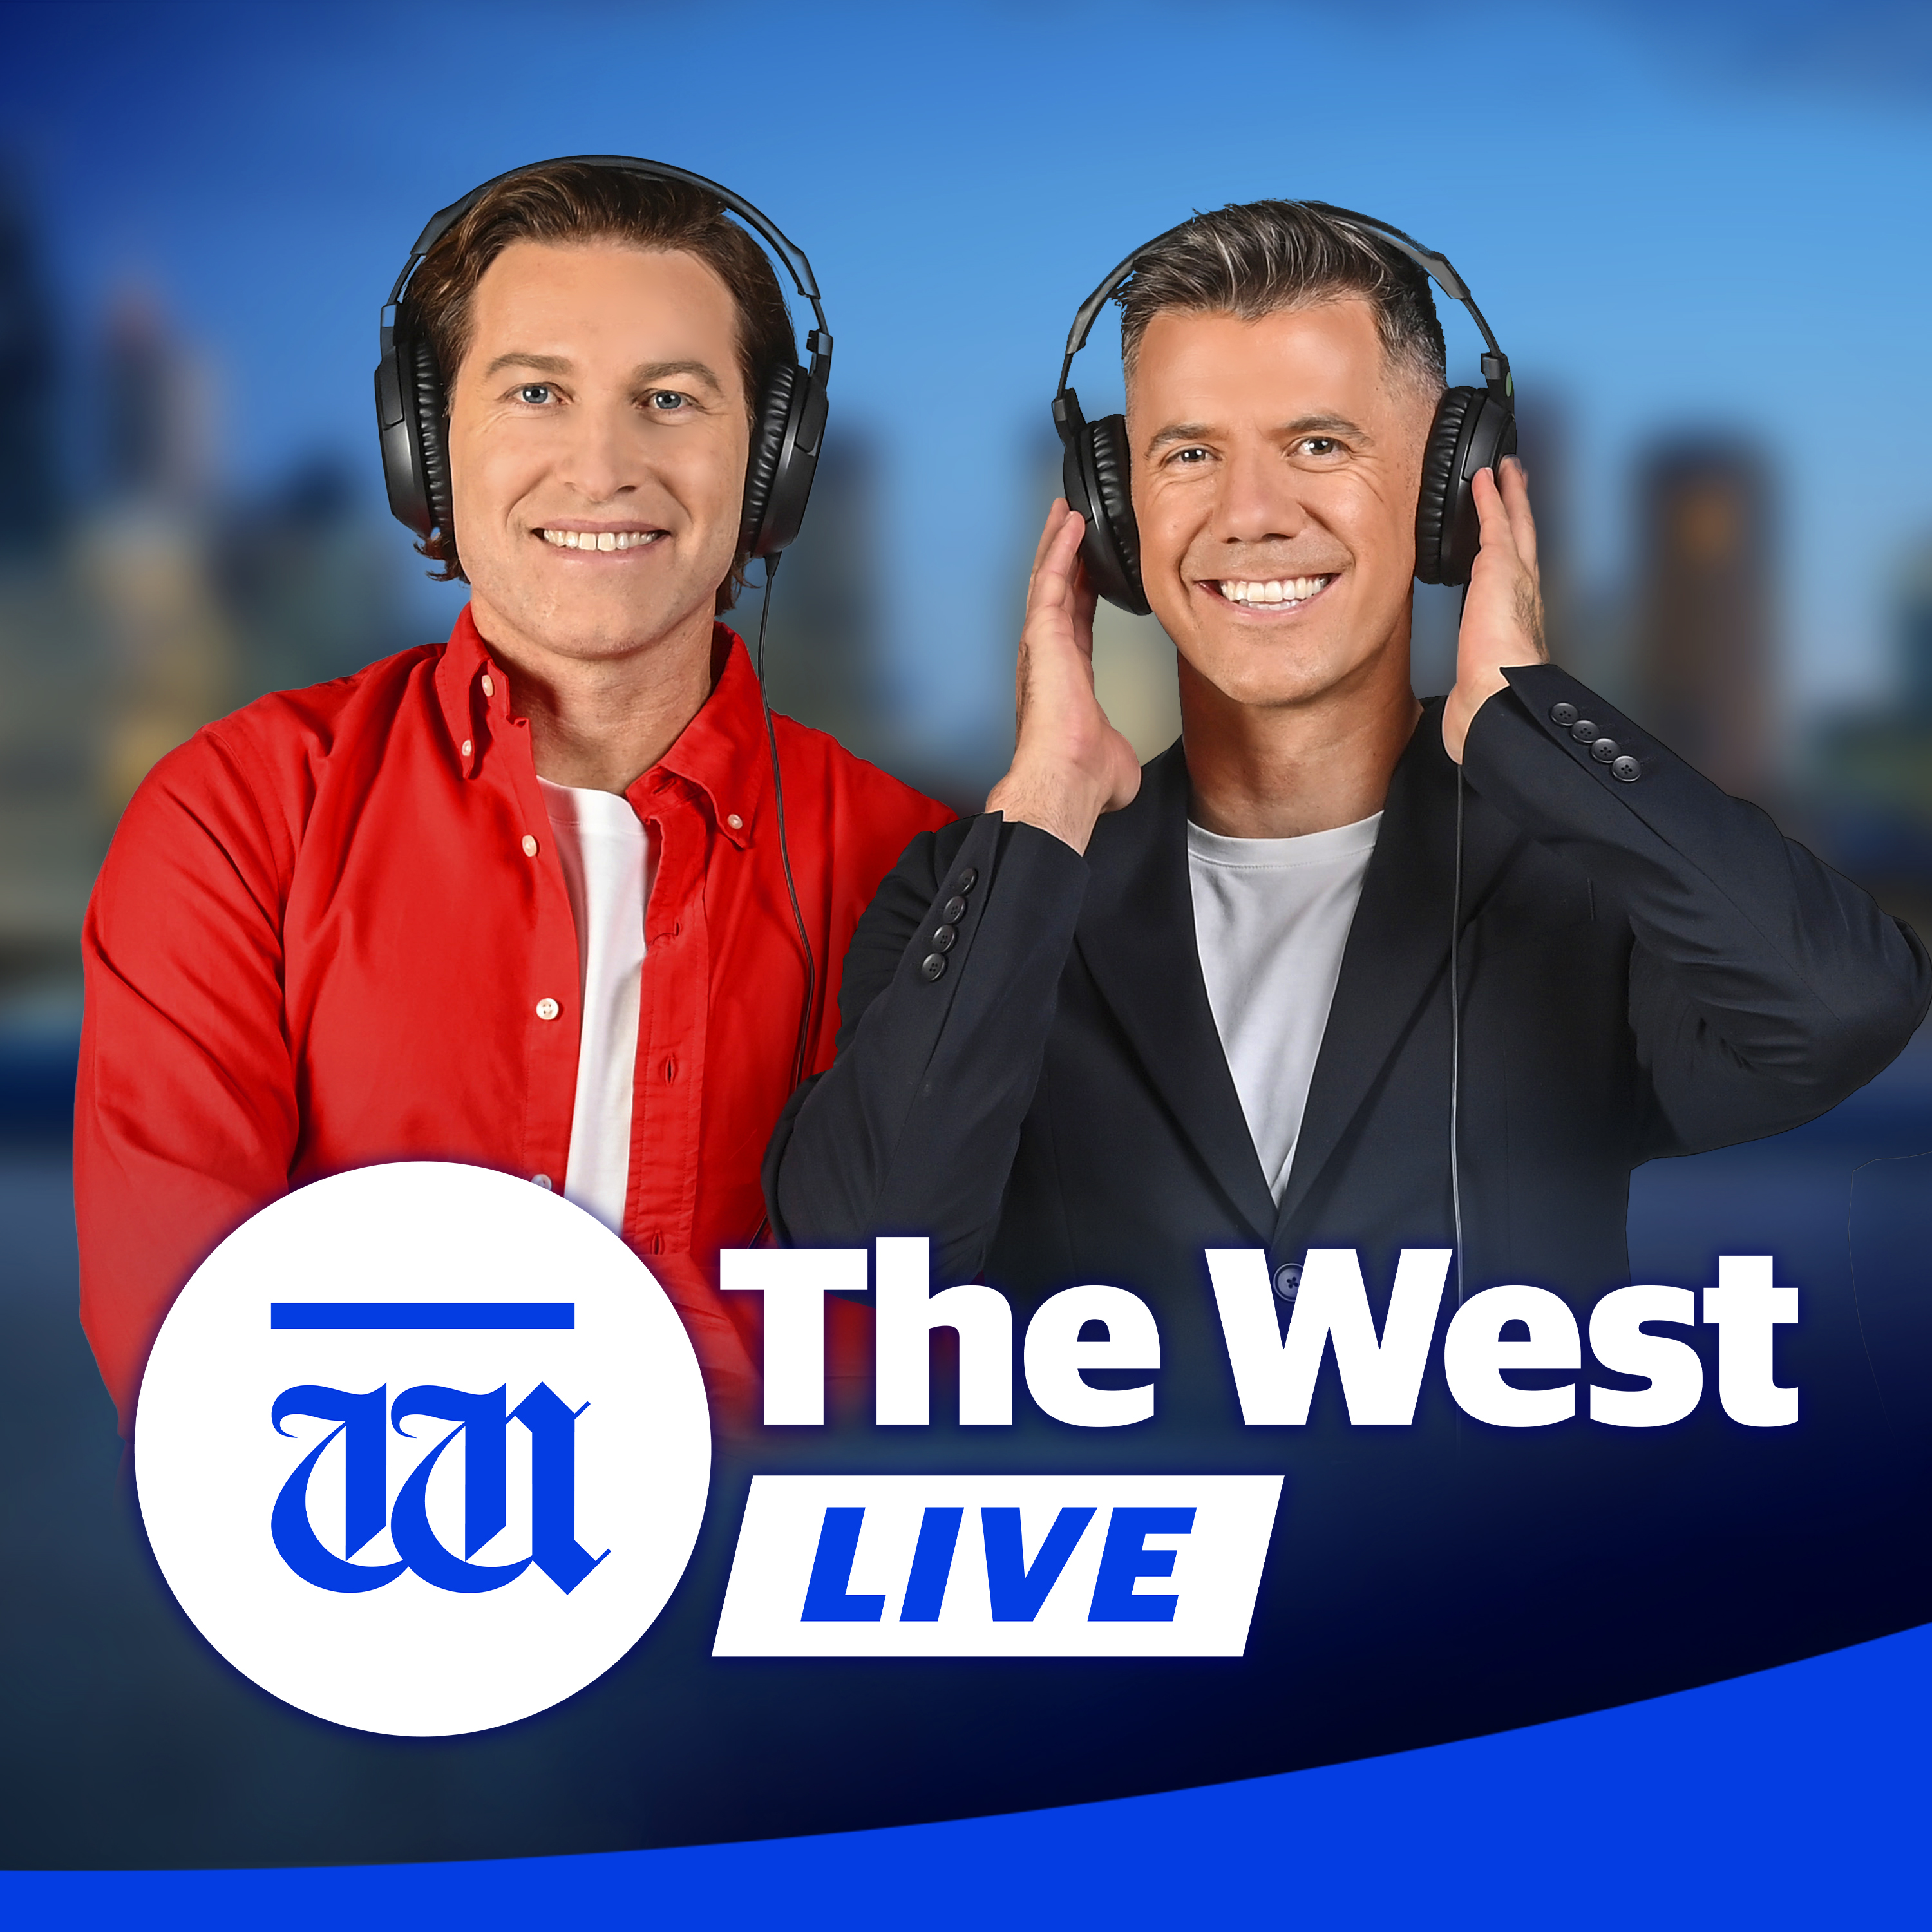 The West Live full show - Friday 6th May, 2022